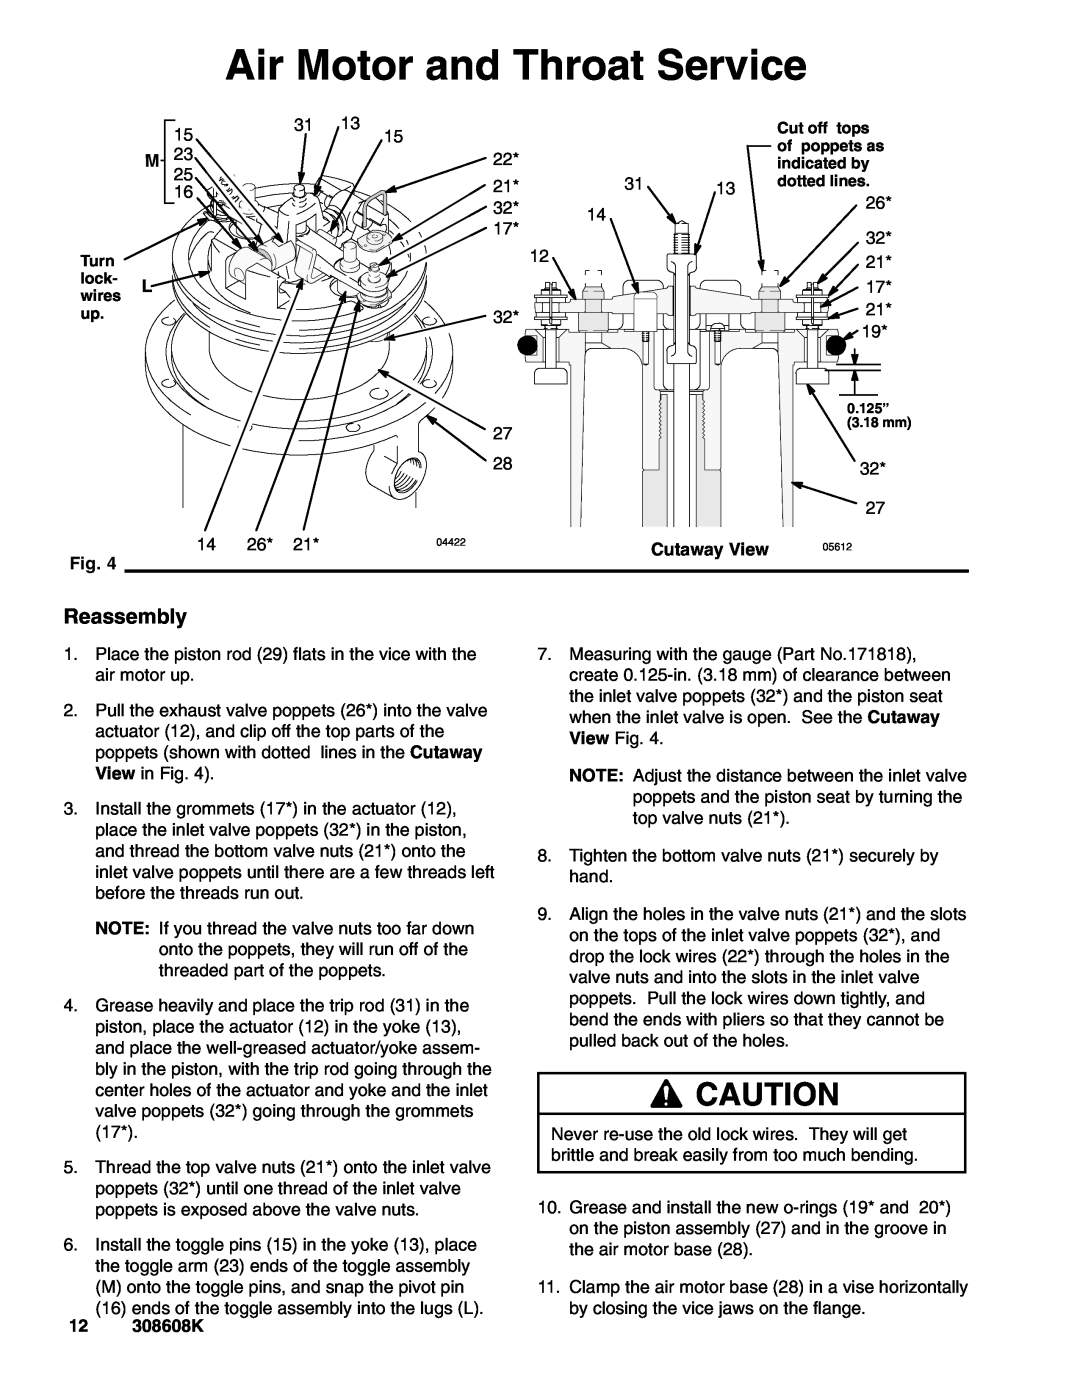 Graco Series D, 238108 important safety instructions Reassembly, Cutaway View, 12 308608K, Air Motor and Throat Service 